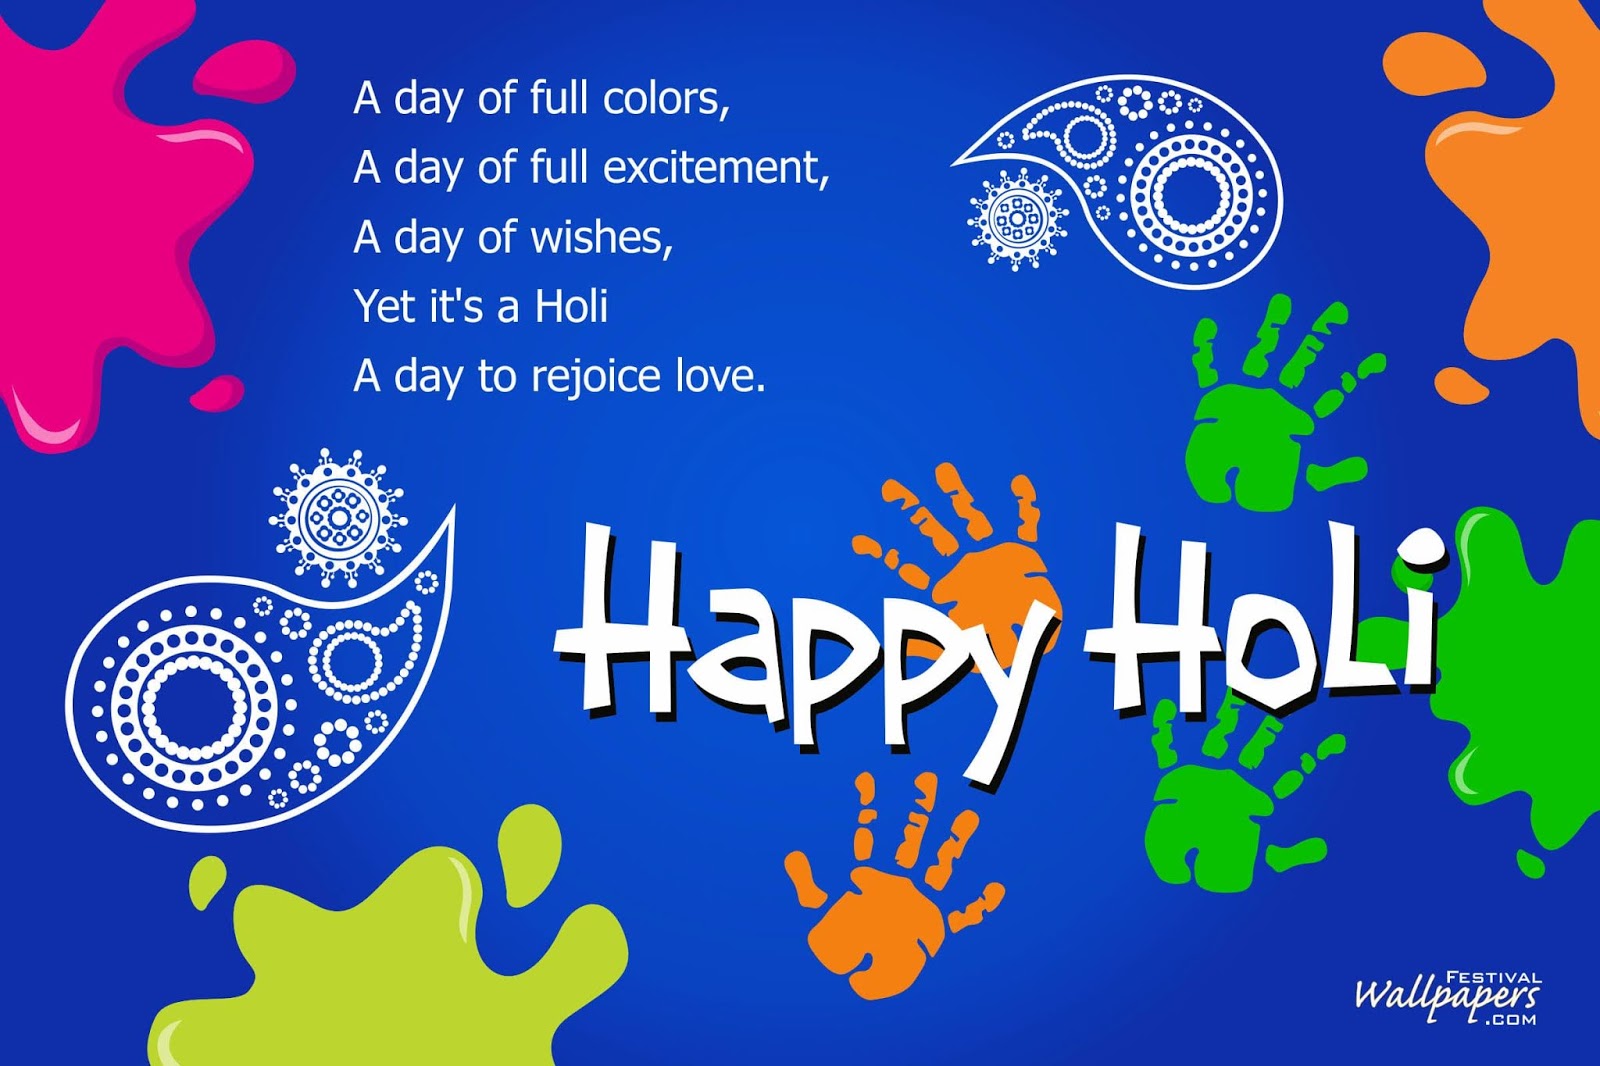 10 Best Happy Holi Wishes Images And Wallpapers For - Graphic Design , HD Wallpaper & Backgrounds